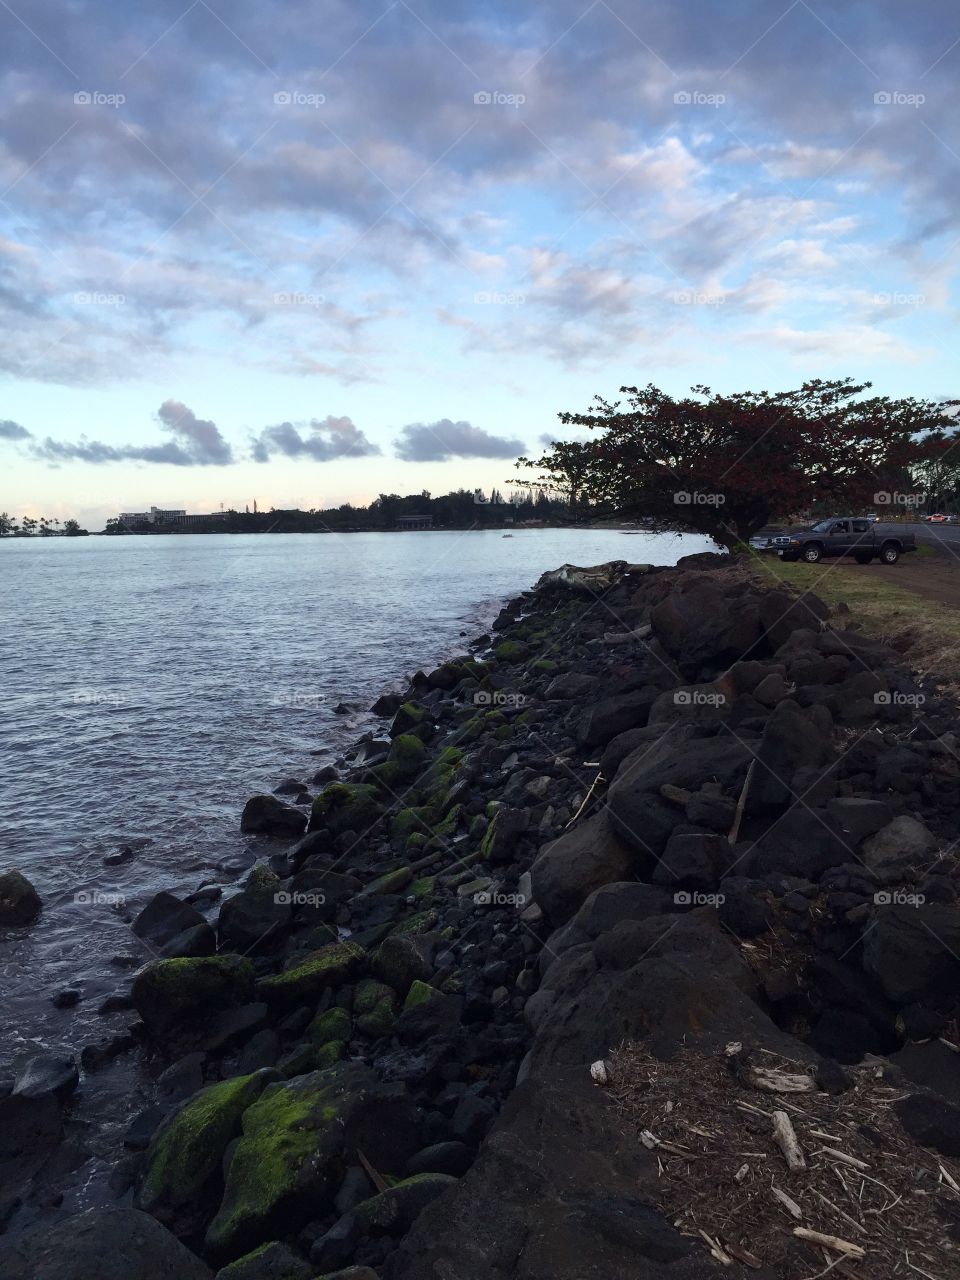 Awesome Beaches and Cliffs, Hilo Bay Afternoon